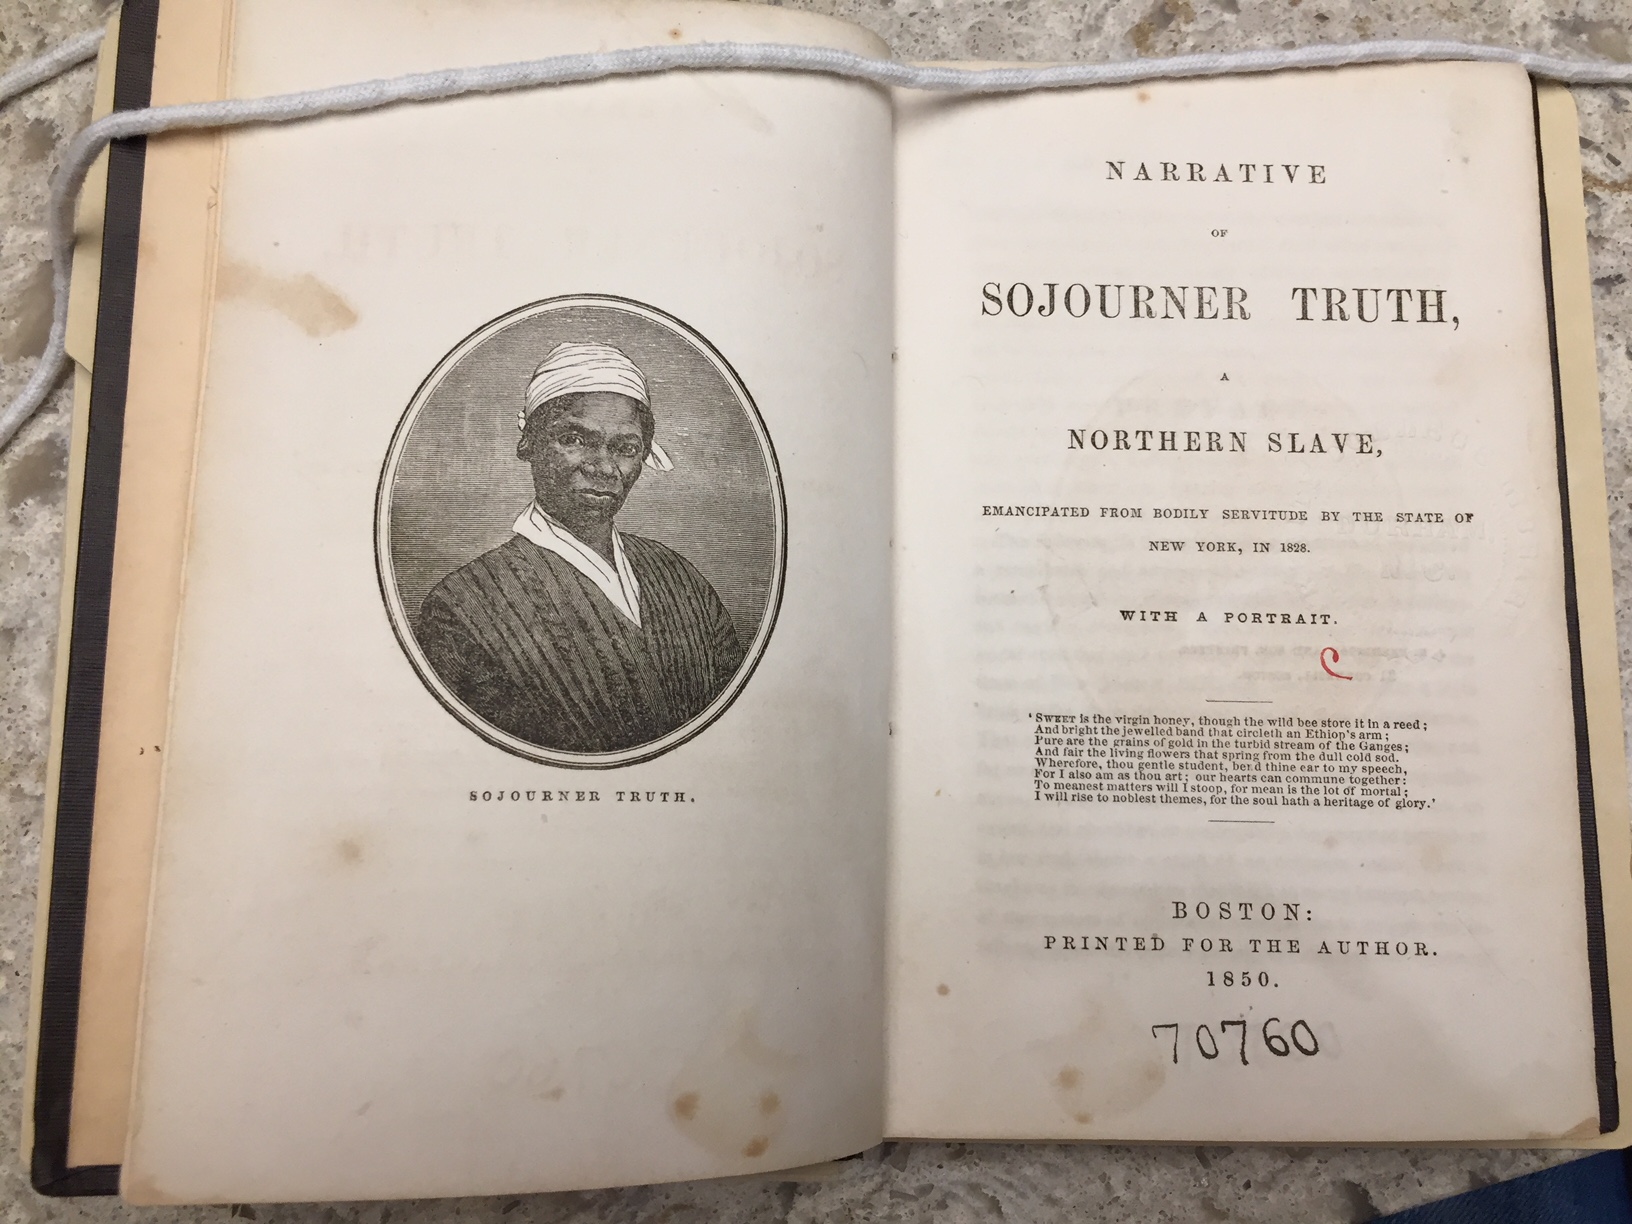 1850 edition of Narrative of Sojourner Truth